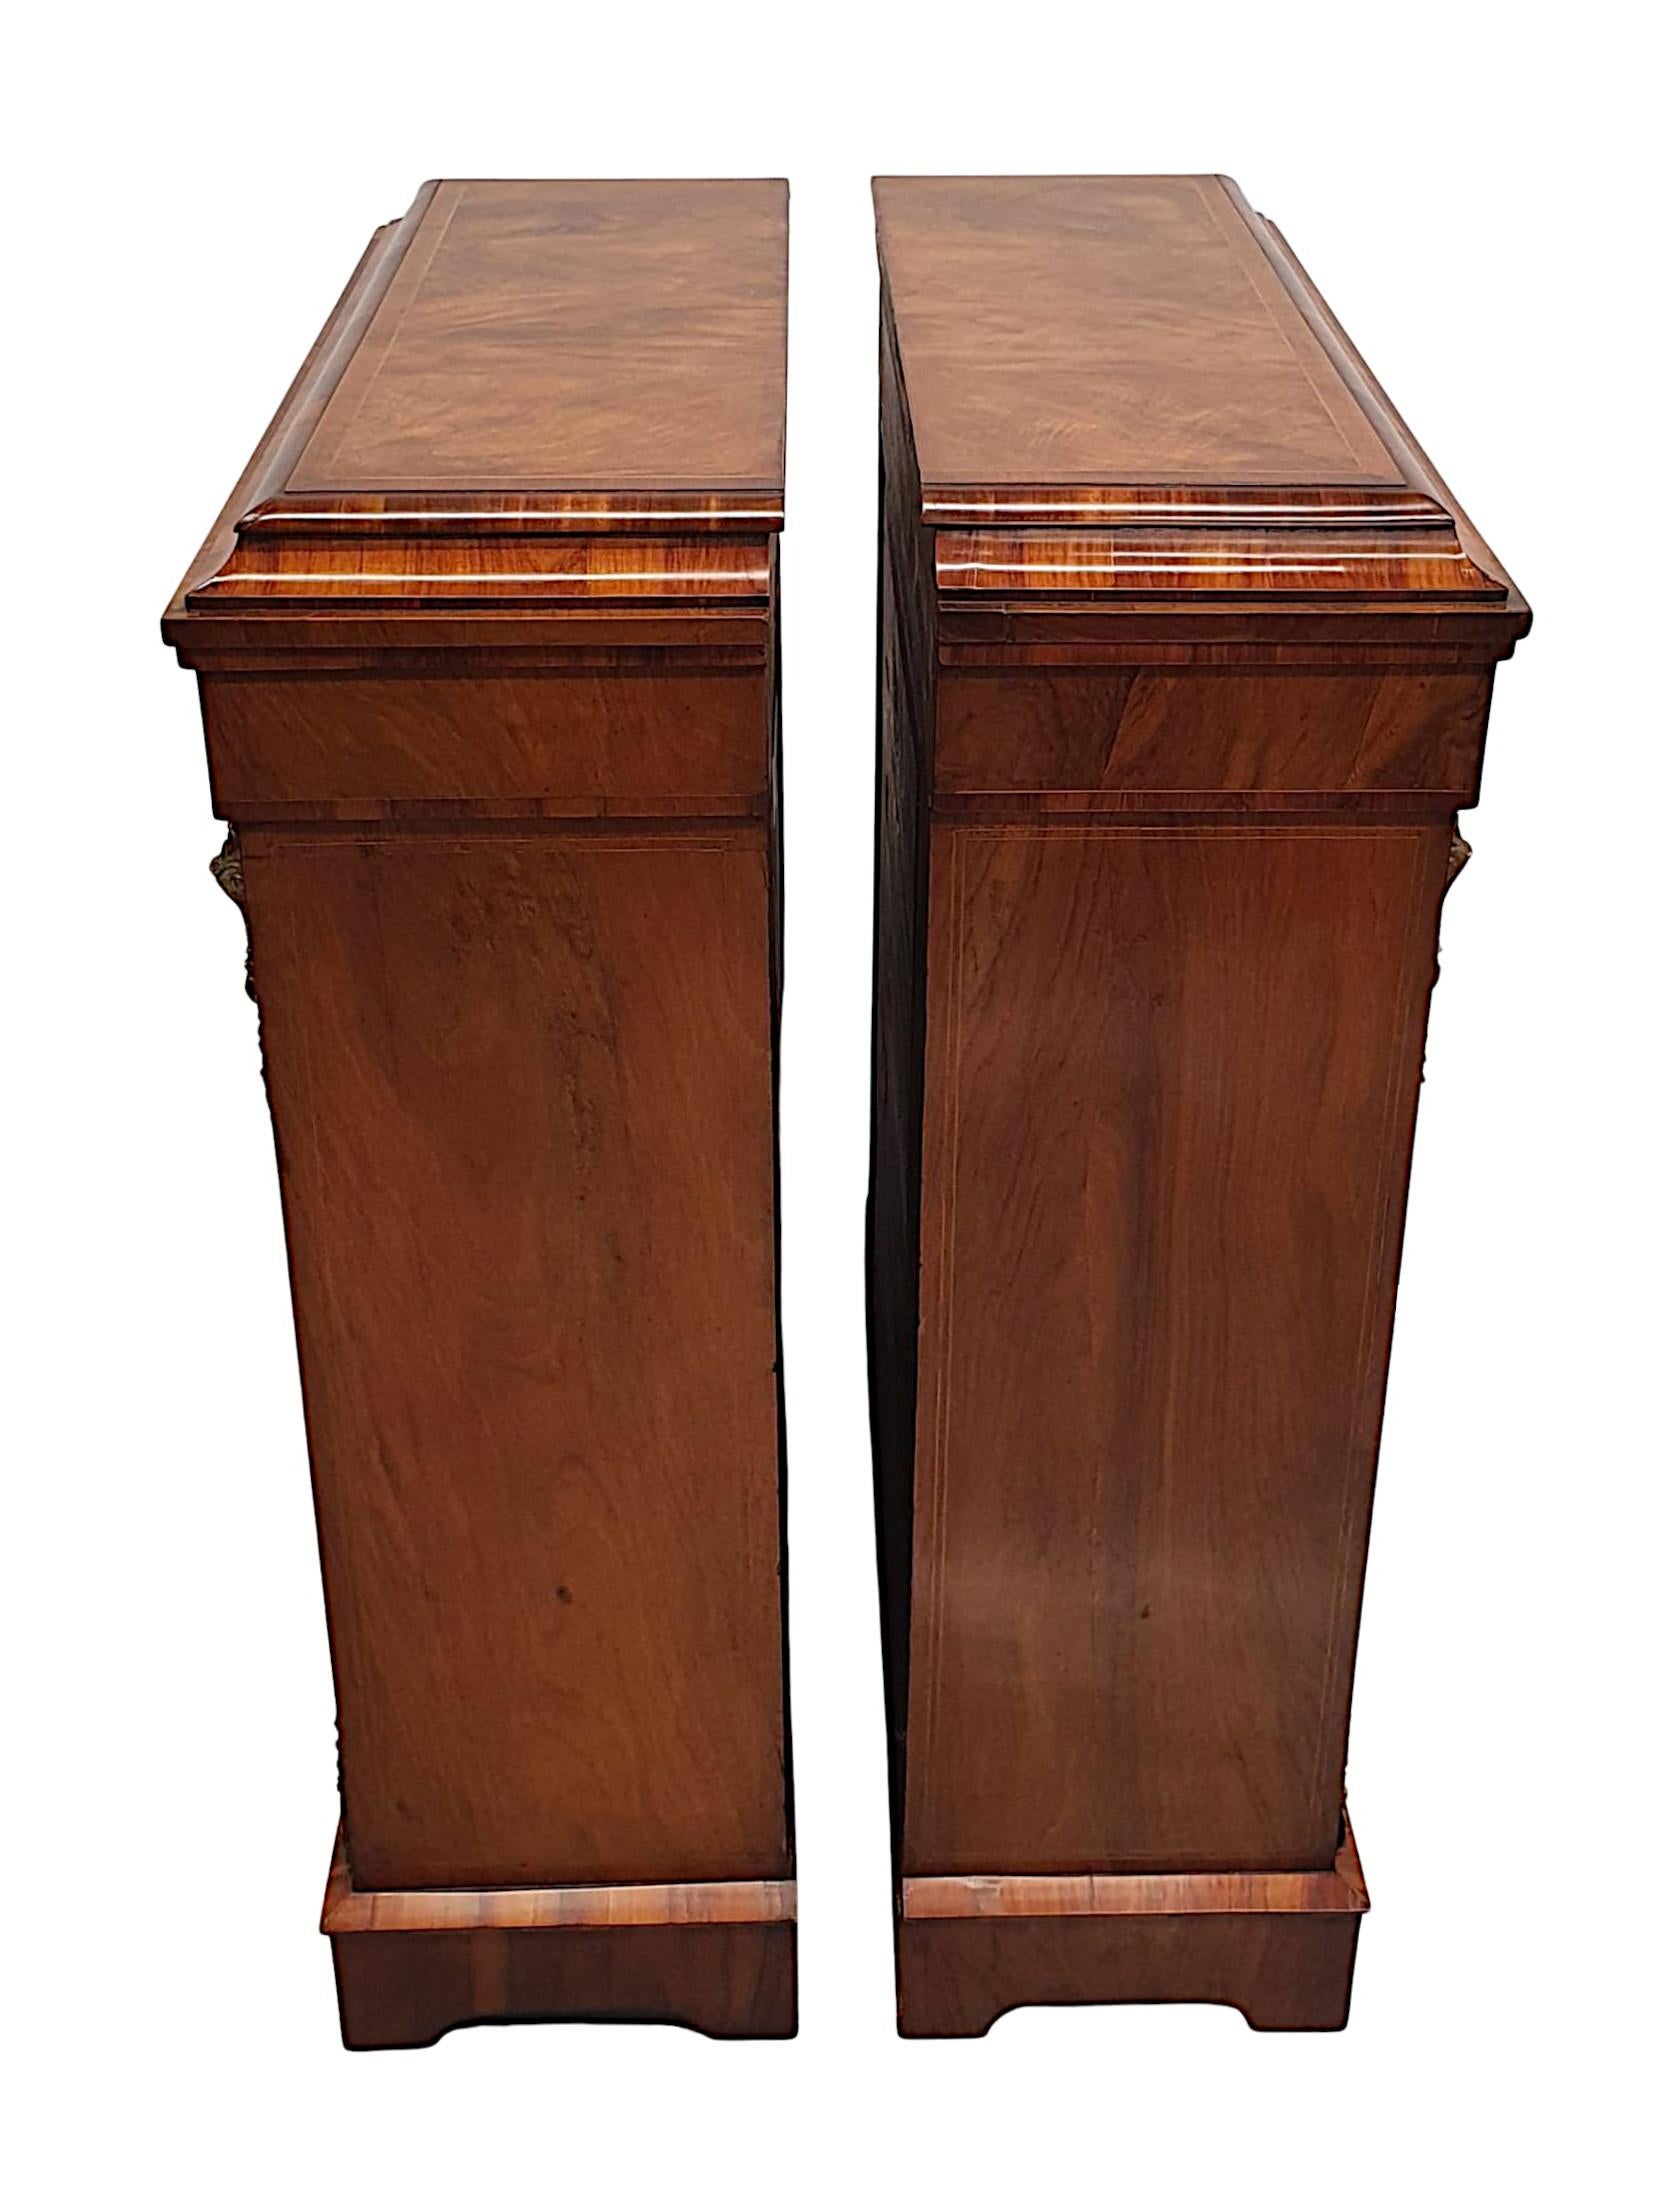 Exceptional Pair of Rare 19th Century Pier Cabinets or Bookcases For Sale 2